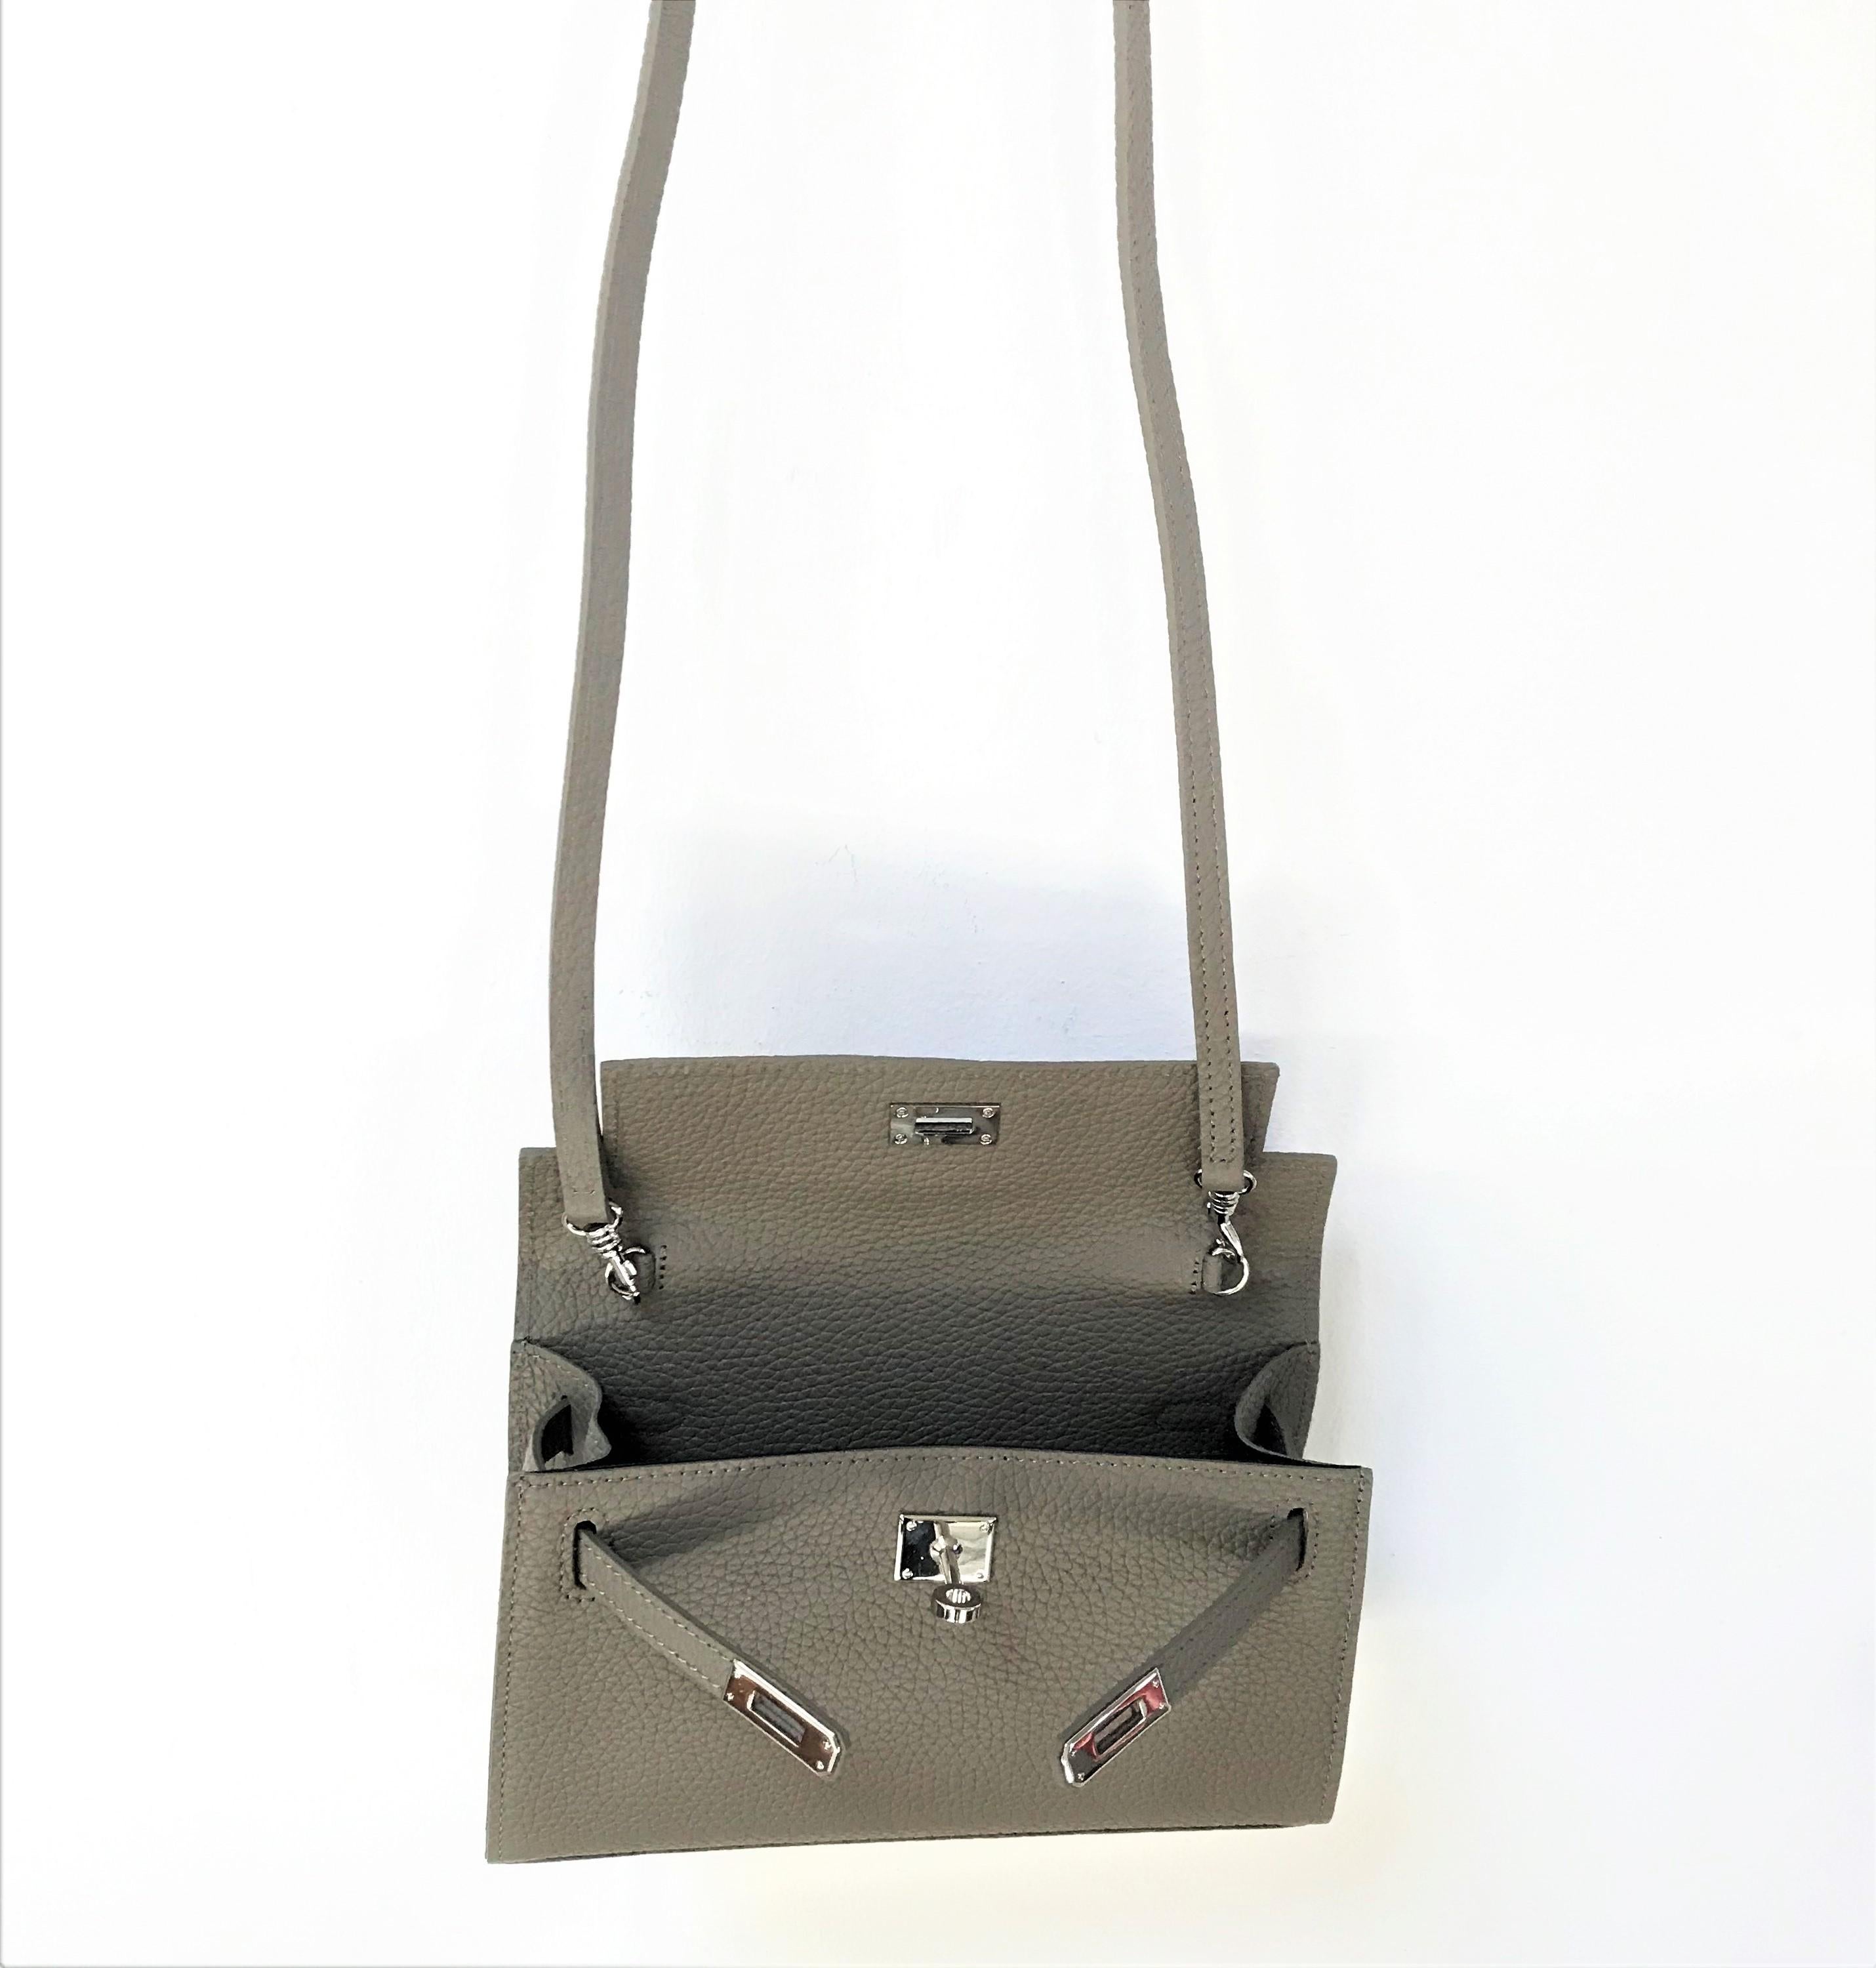 a new Pochette bag with detachable long shoulder strap made of  leather like chourcheval and silver hardware. The bag has an inside compartment and is lined with black fabric. Taub is a color how fit to all other colors.

Measurement: Width 22 cm,